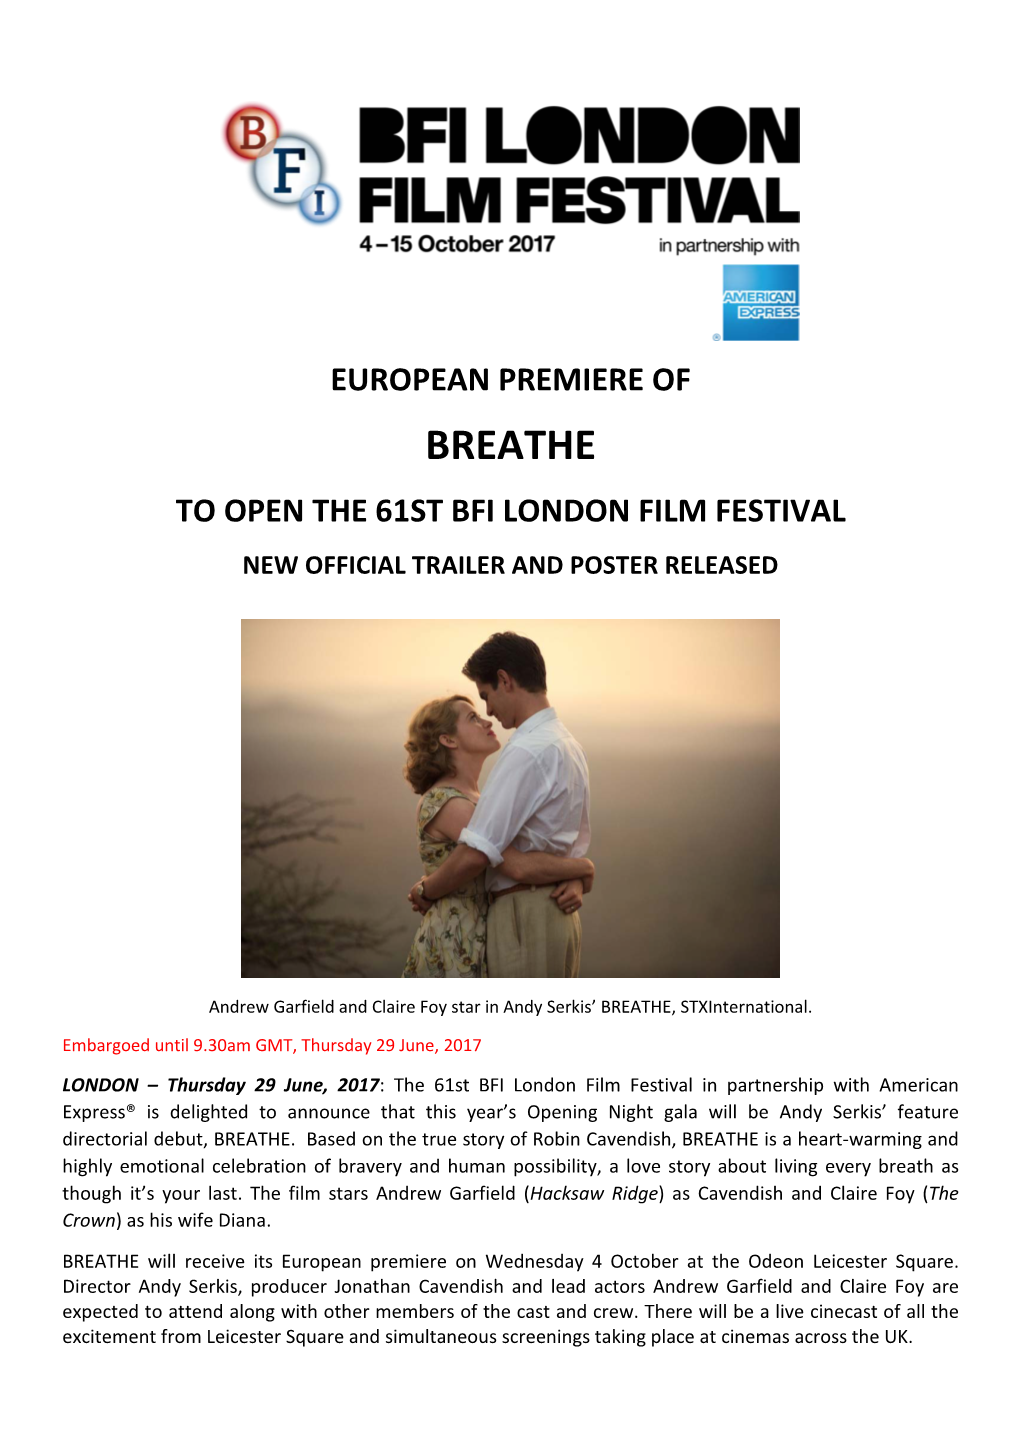 European Premiere of Breathe to Open the 61St Bfi London Film Festival New Official Trailer and Poster Released